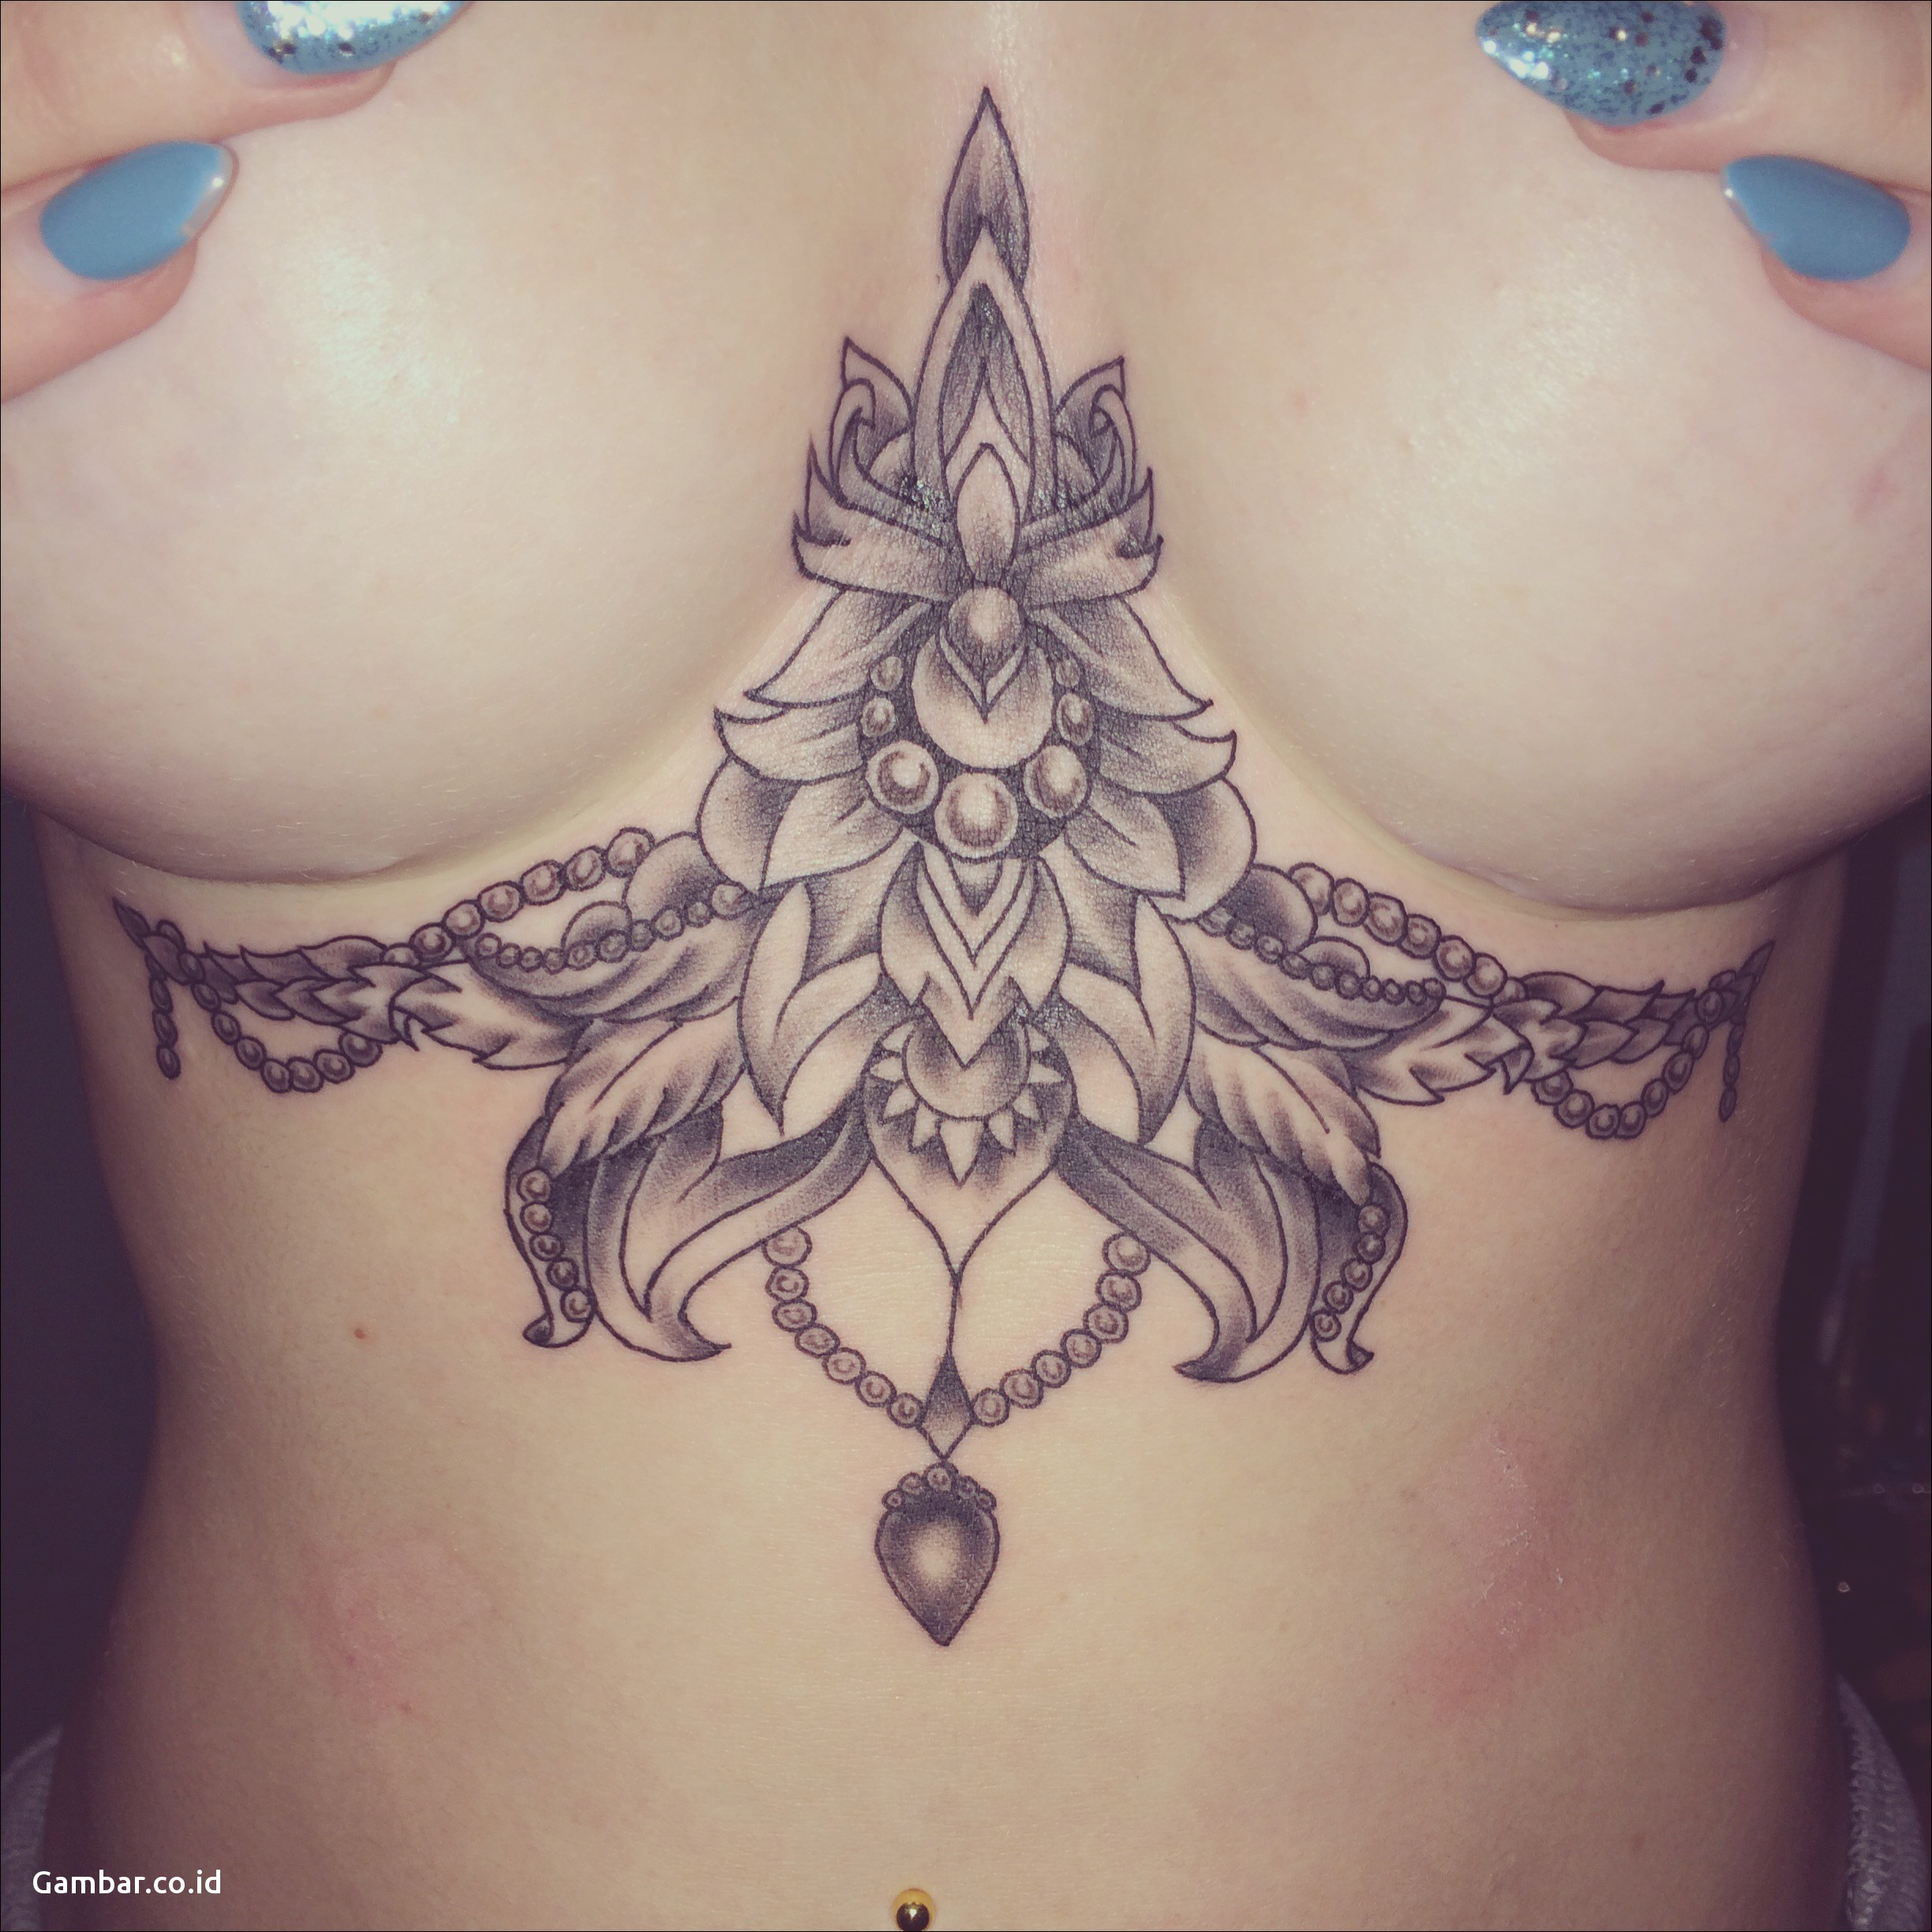 Download Gambar Under Chest Tattoos For Women Amazing Tattoo within size 2448 X 2448